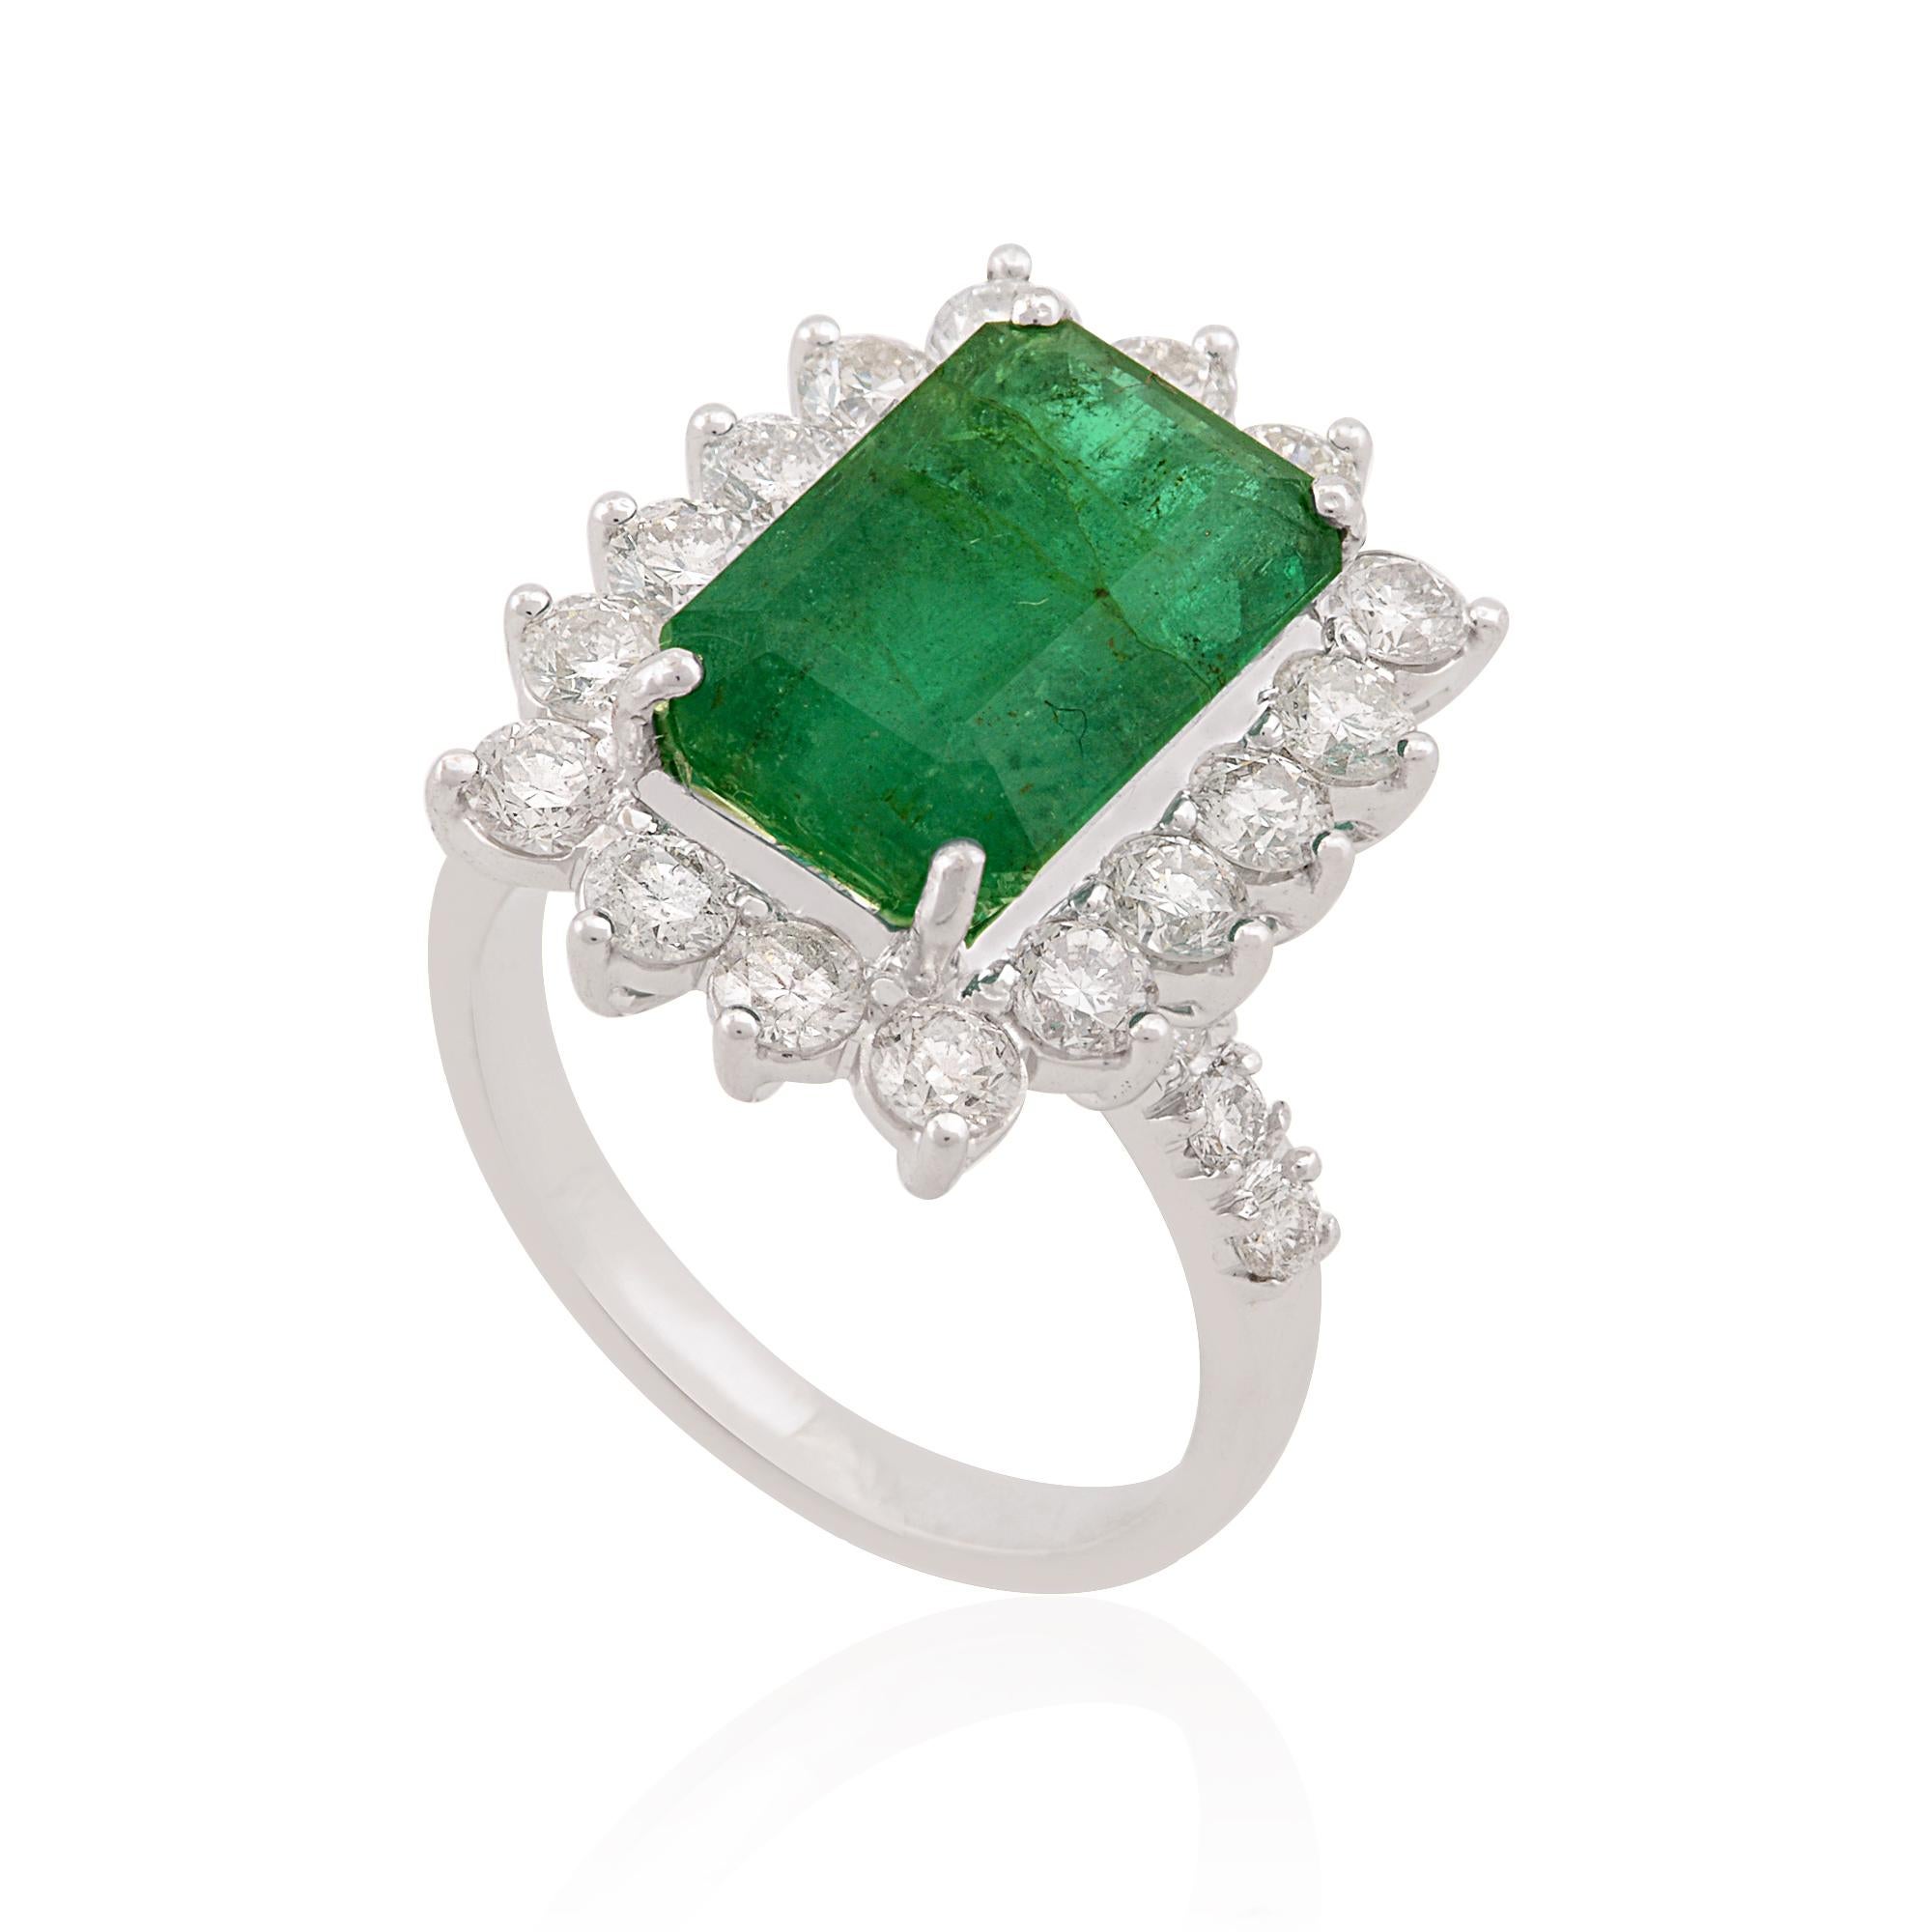 For Sale:  Natural Emerald Gemstone Cocktail Ring Diamond Solid 18k White Gold Fine Jewelry 3